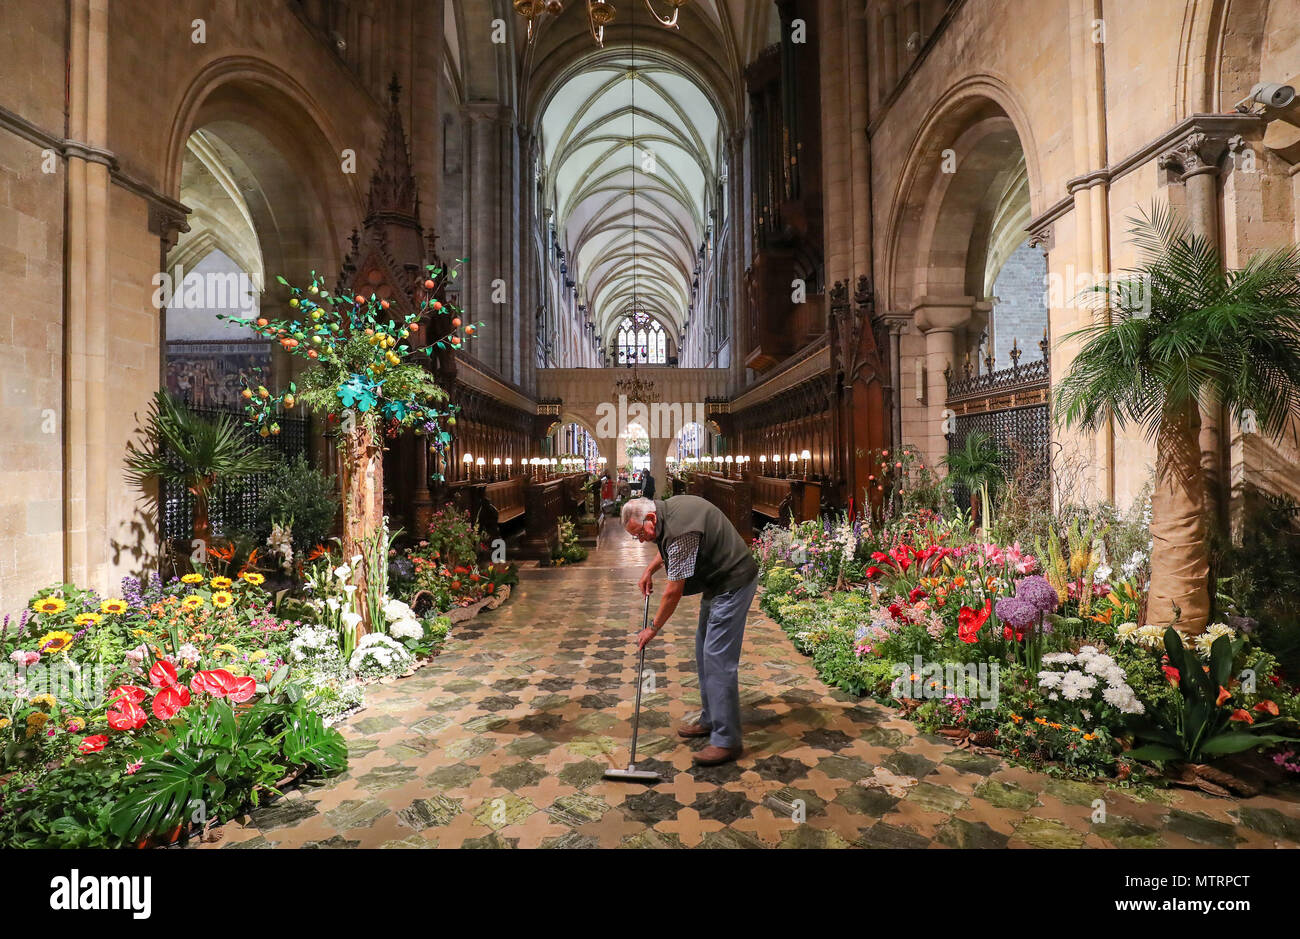 Final preparations are made to displays inside Chichester Cathedral, as it is filled with 80 flower arrangements using over 50,000 flowers, to celebrate its annual Festival of Flowers, which this year has a theme of 'This Earthly Paradise'. Stock Photo